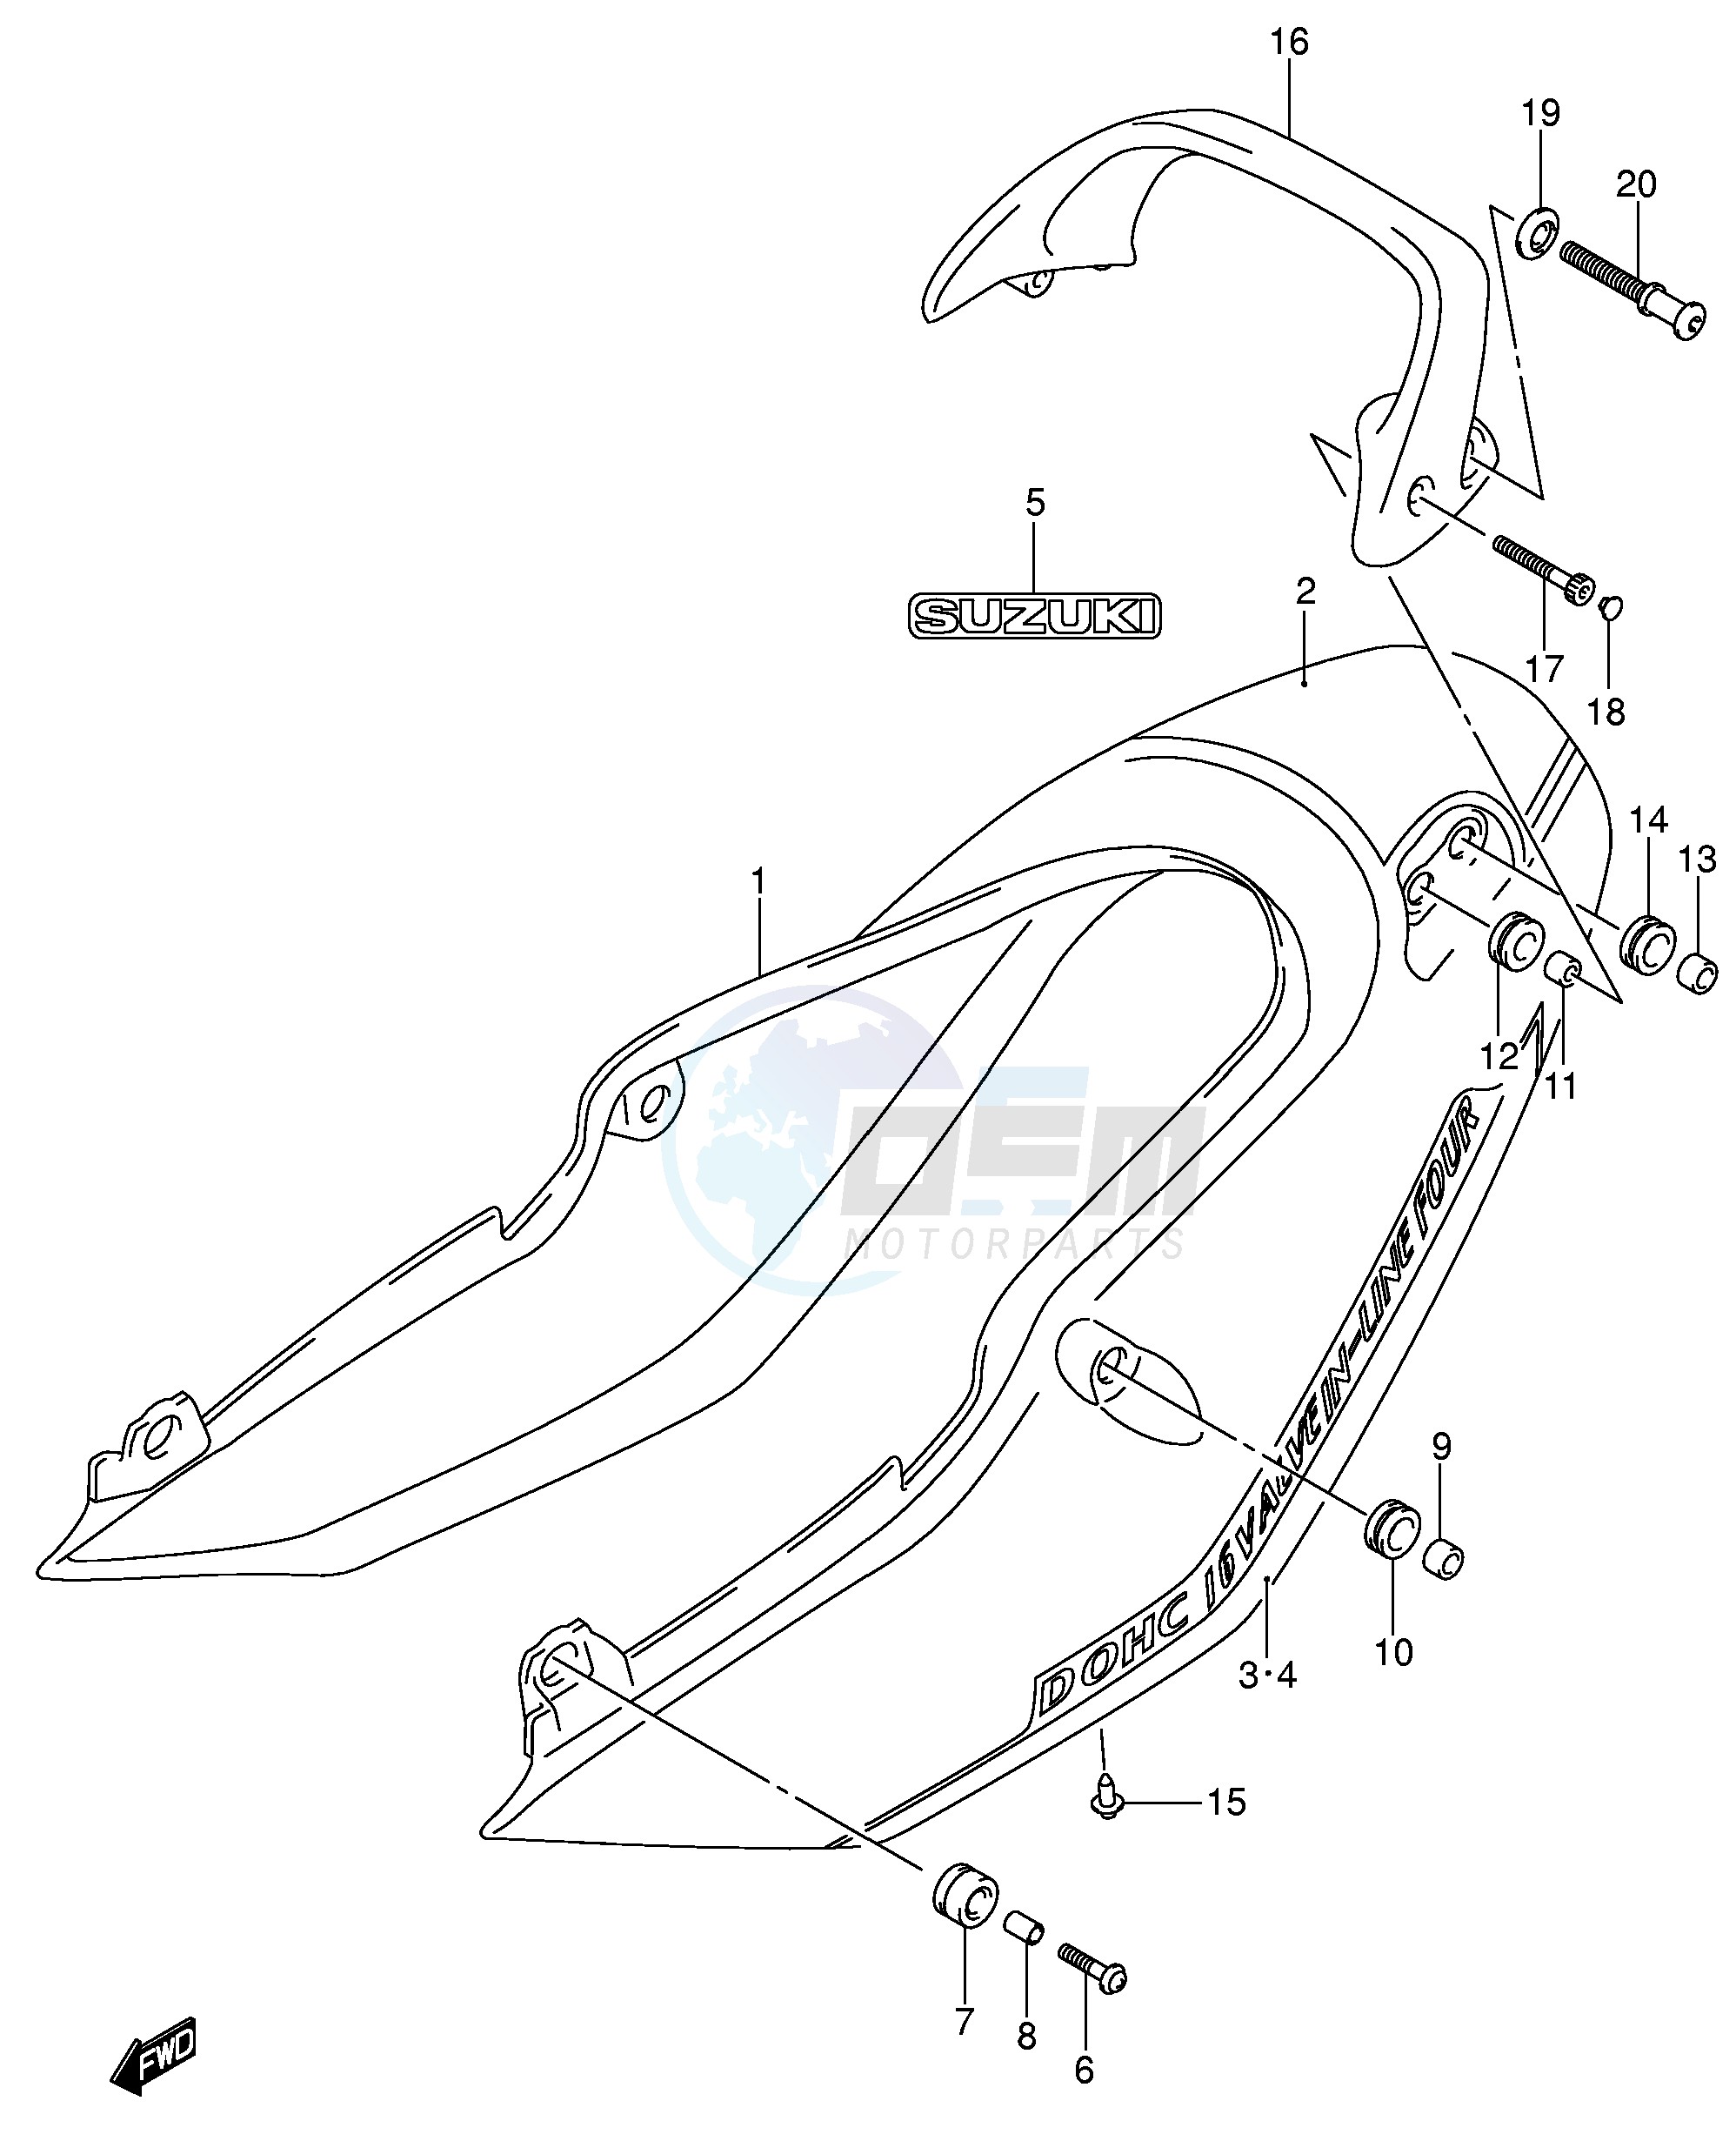 SEAT TAIL COVER (GSF1200SZK5) blueprint